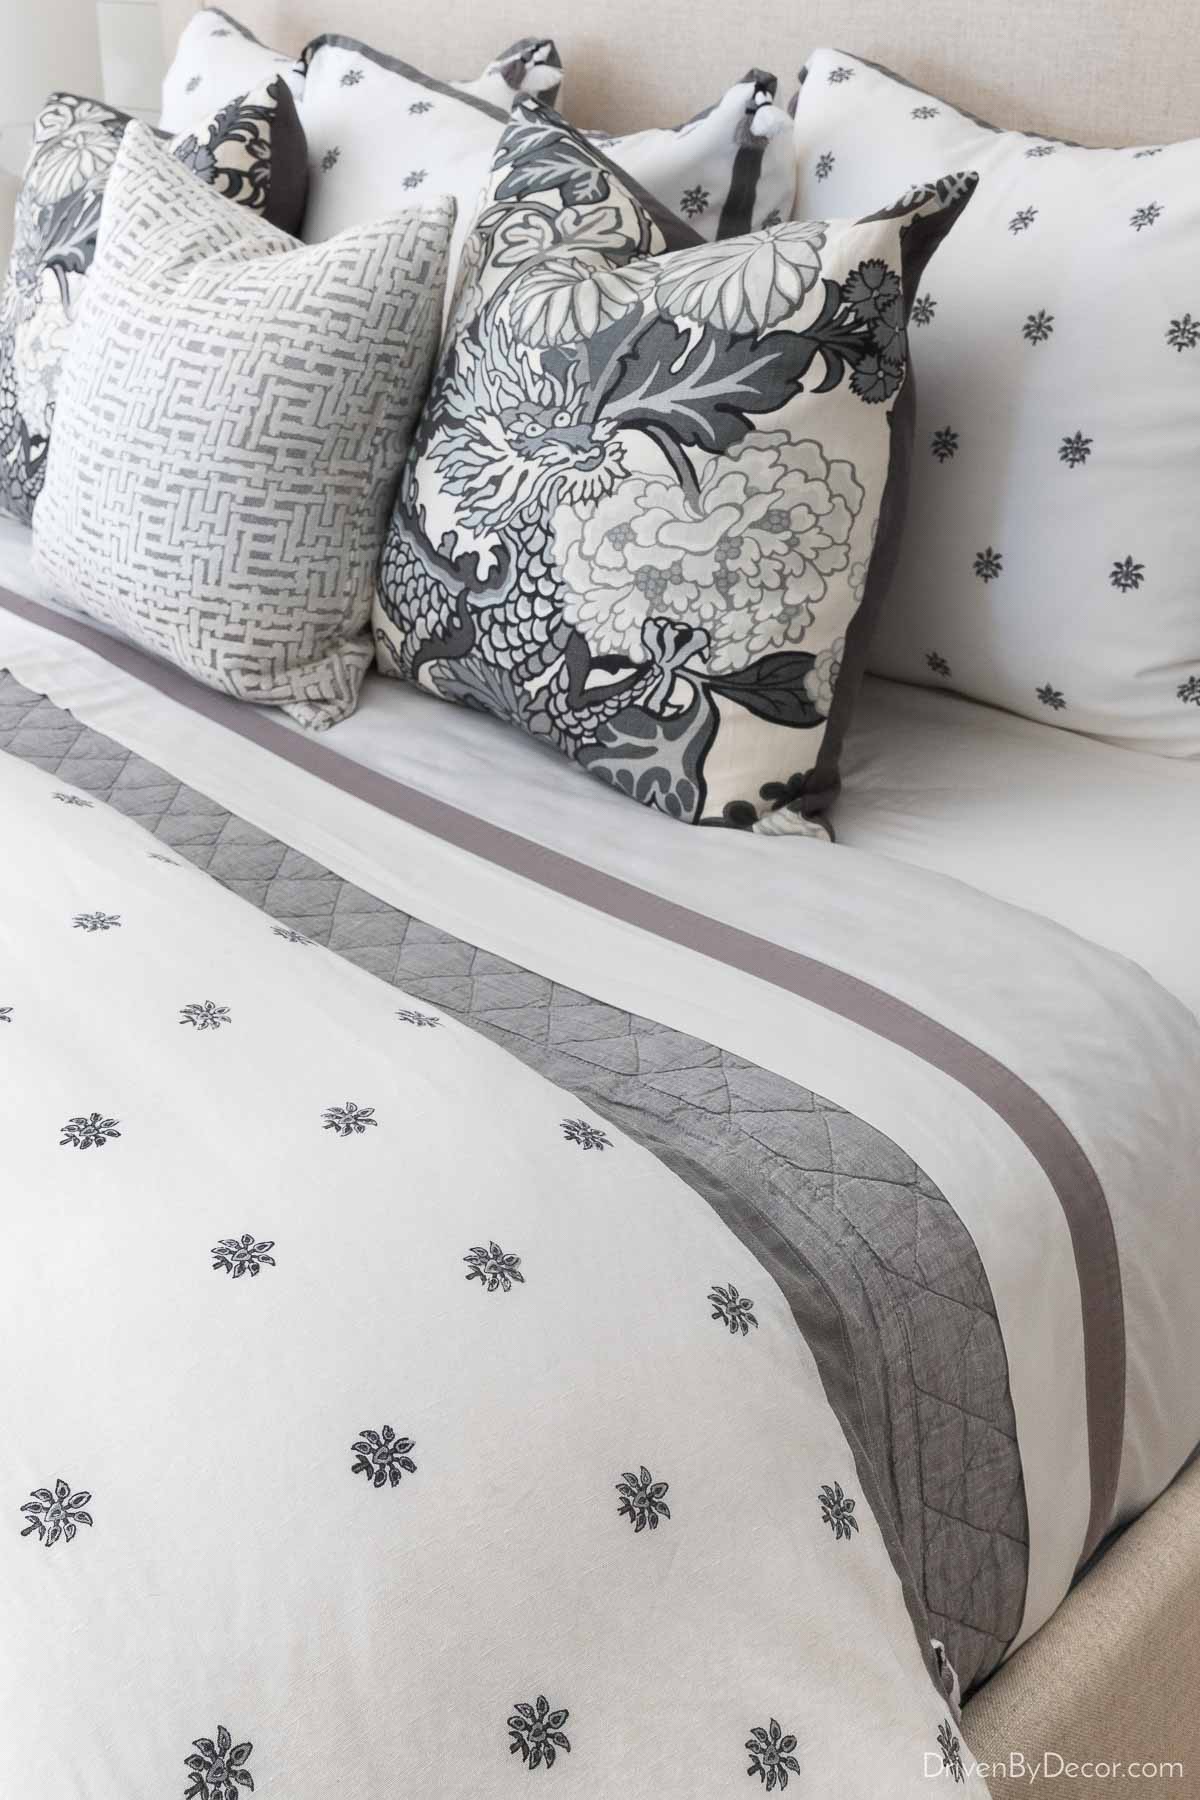 Guest Room Bedding: Tips for Creating a Beautiful, Cozy Bed For Your  Guests! - Driven by Decor